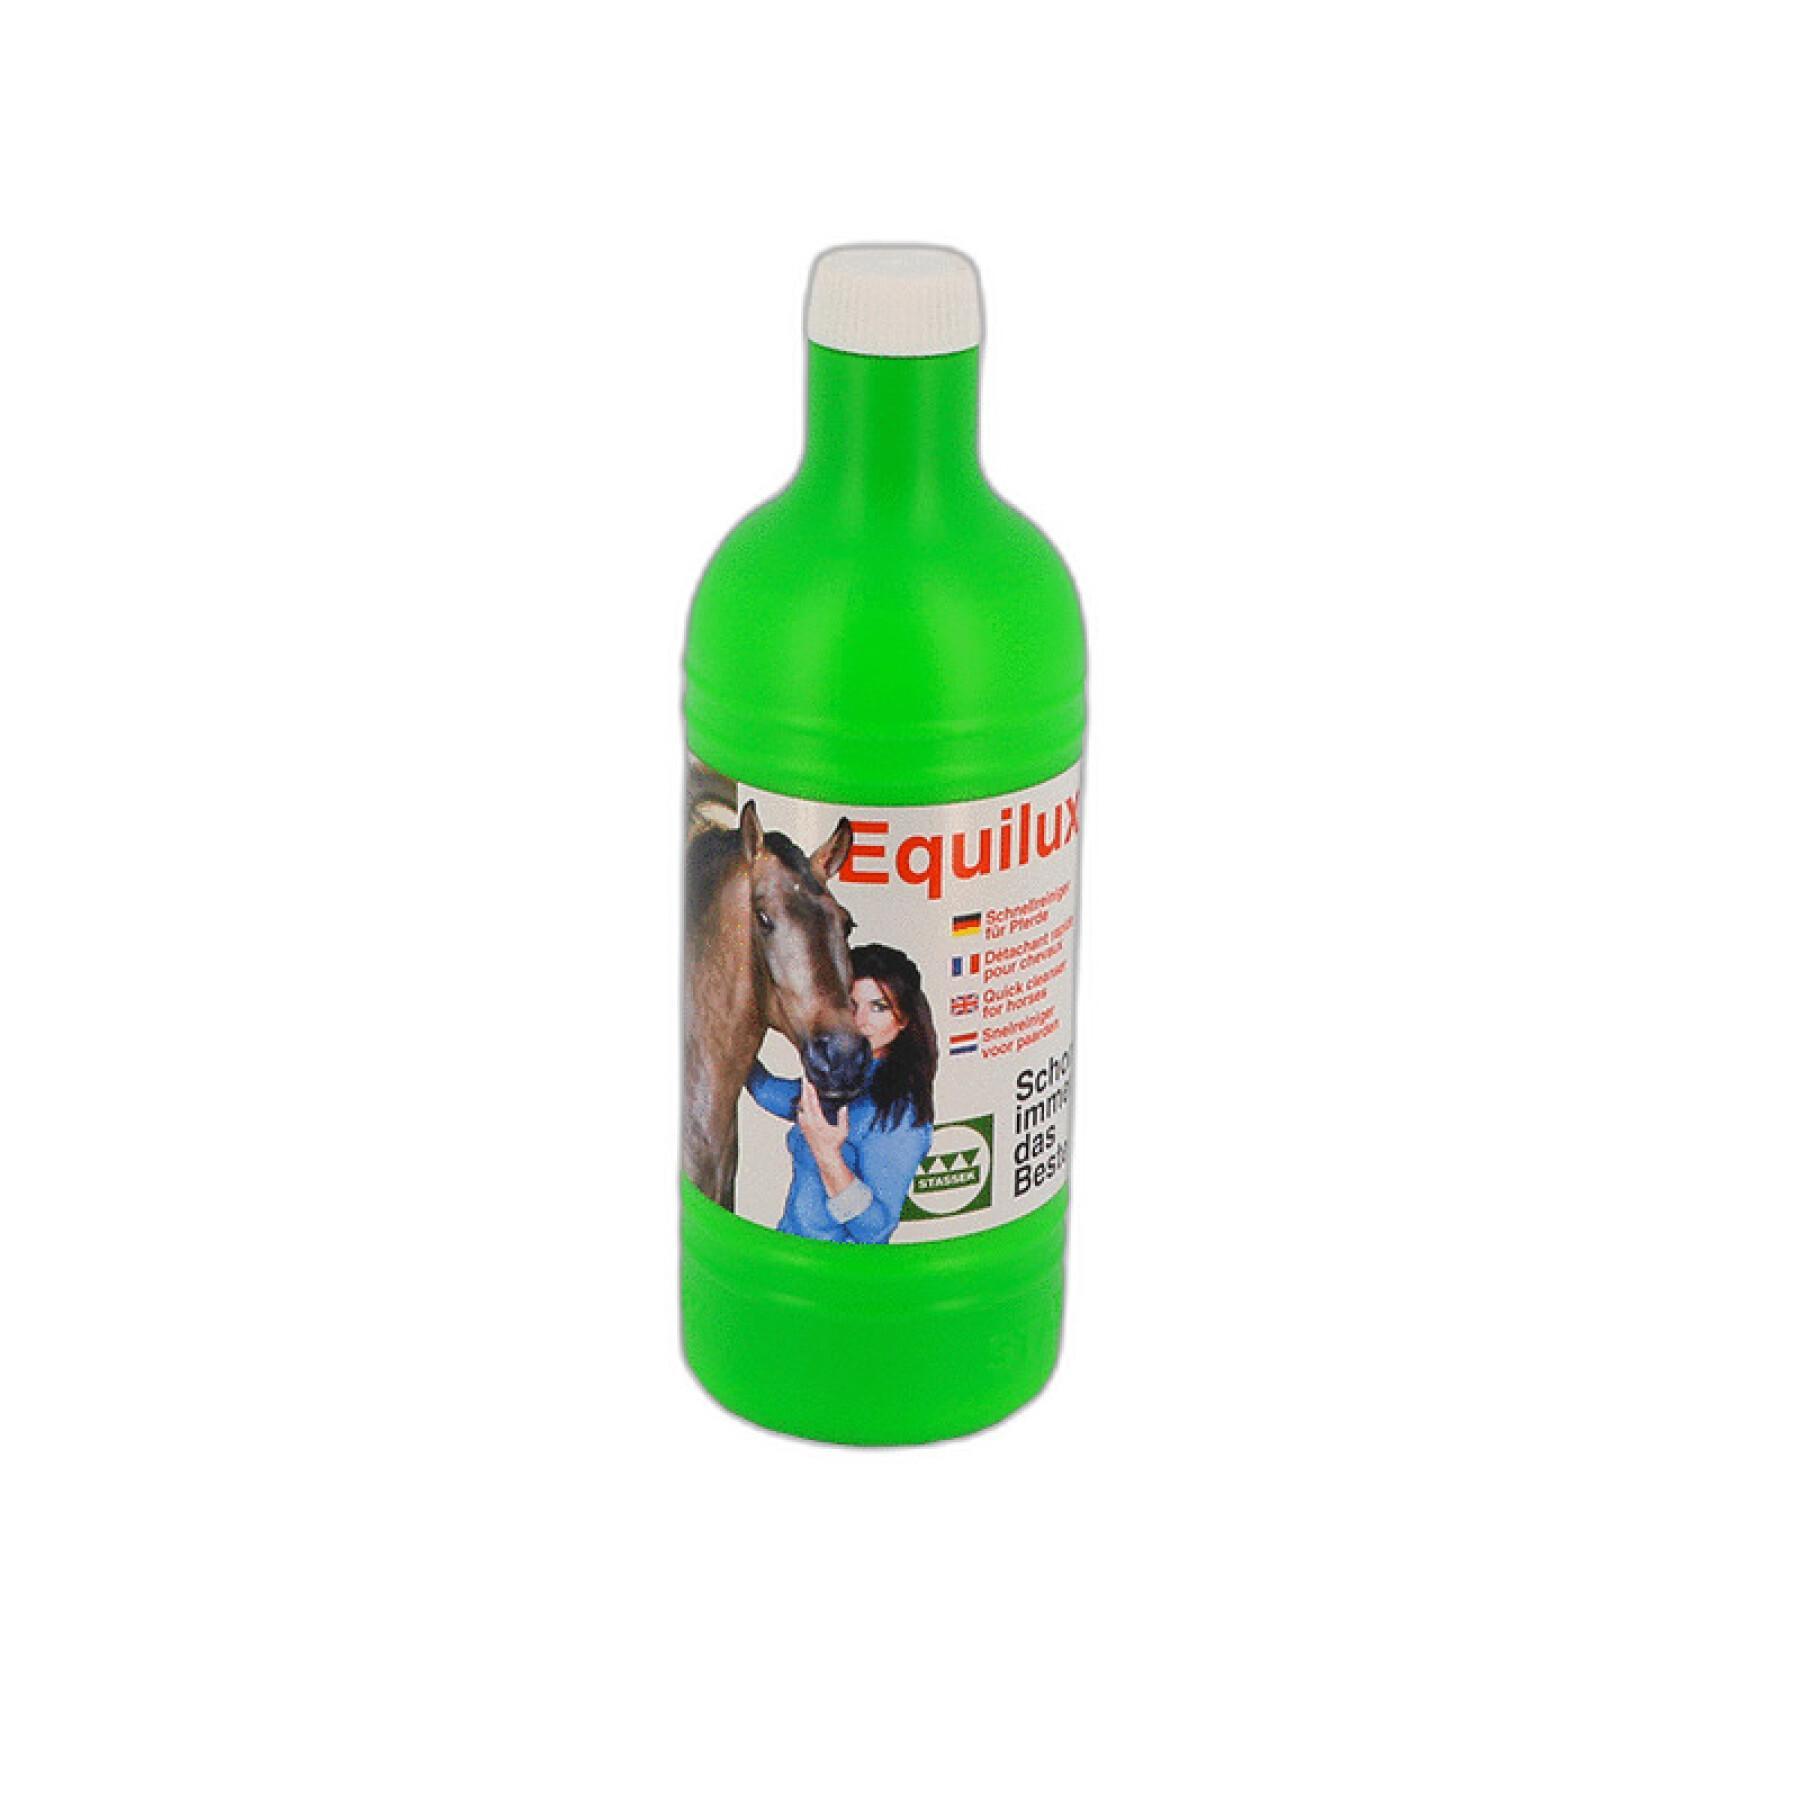 Dress cleaner Equilux